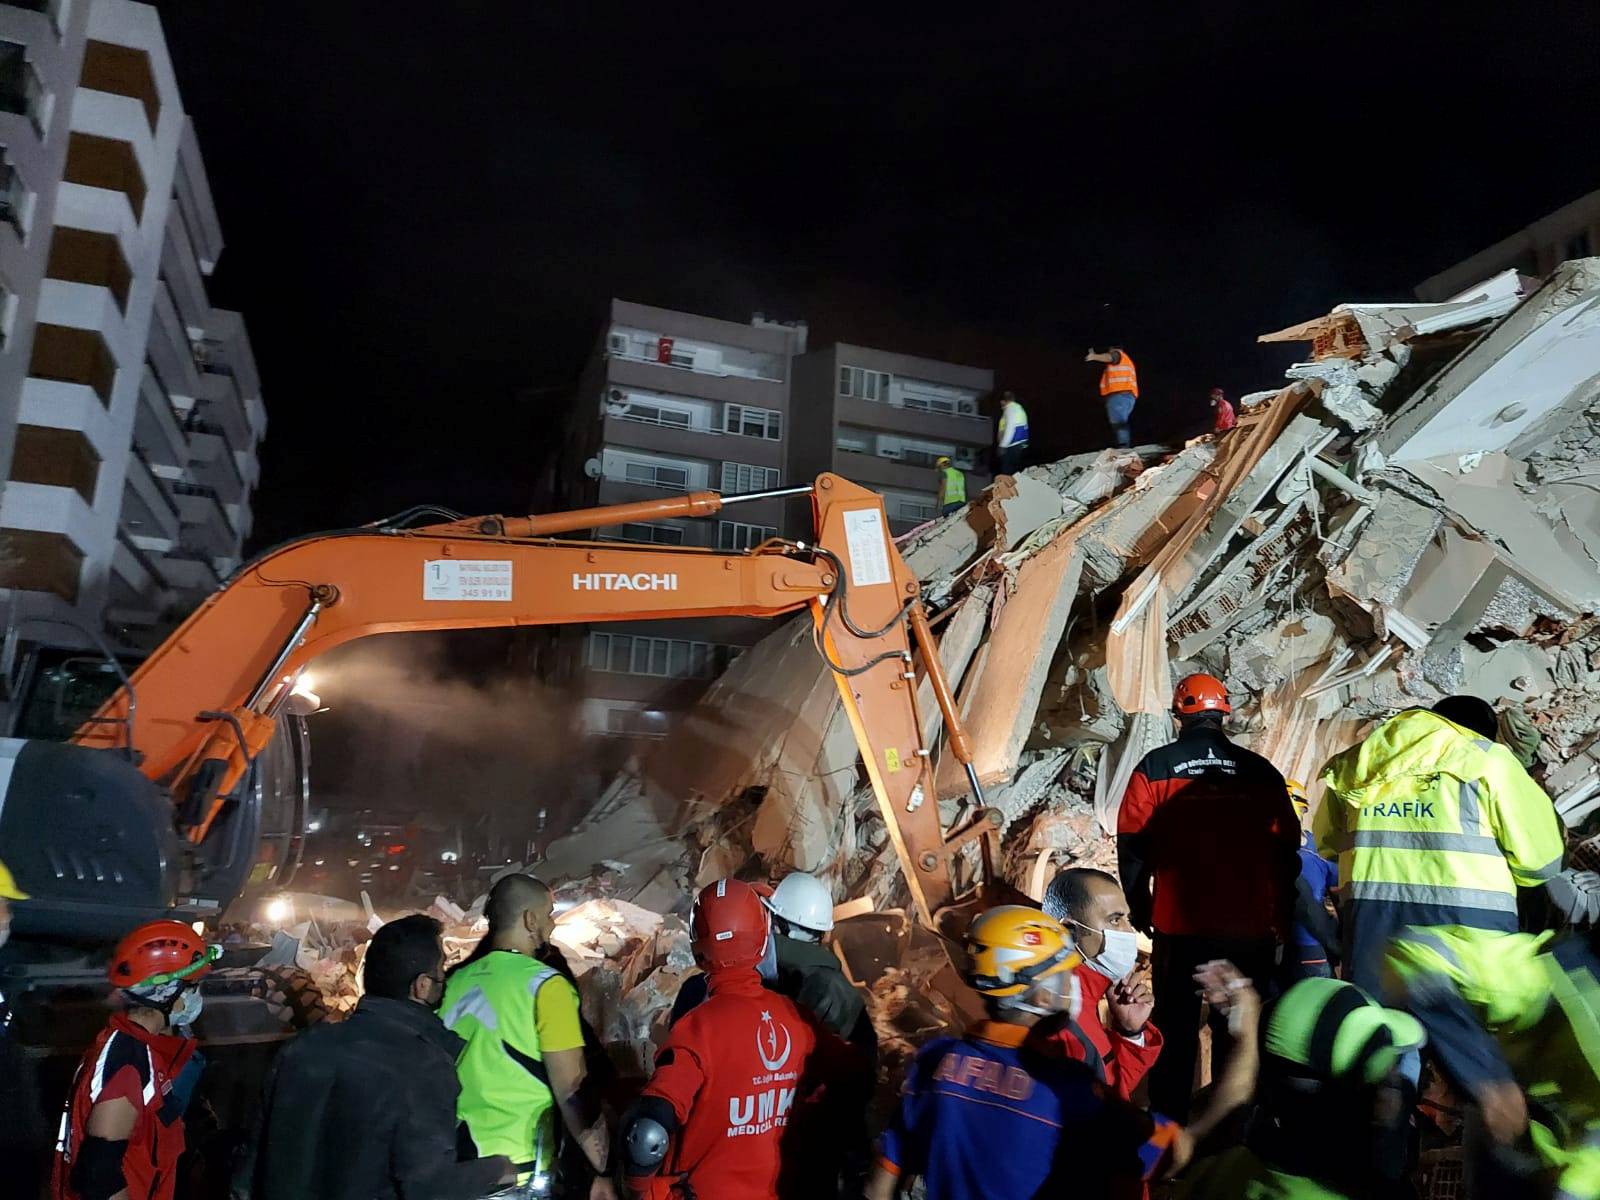 Rescque teams search for survivors at a collapsed building after a strong earthquake struck the Aegean Sea where some buildings collapsed in the coastal province of Izmir